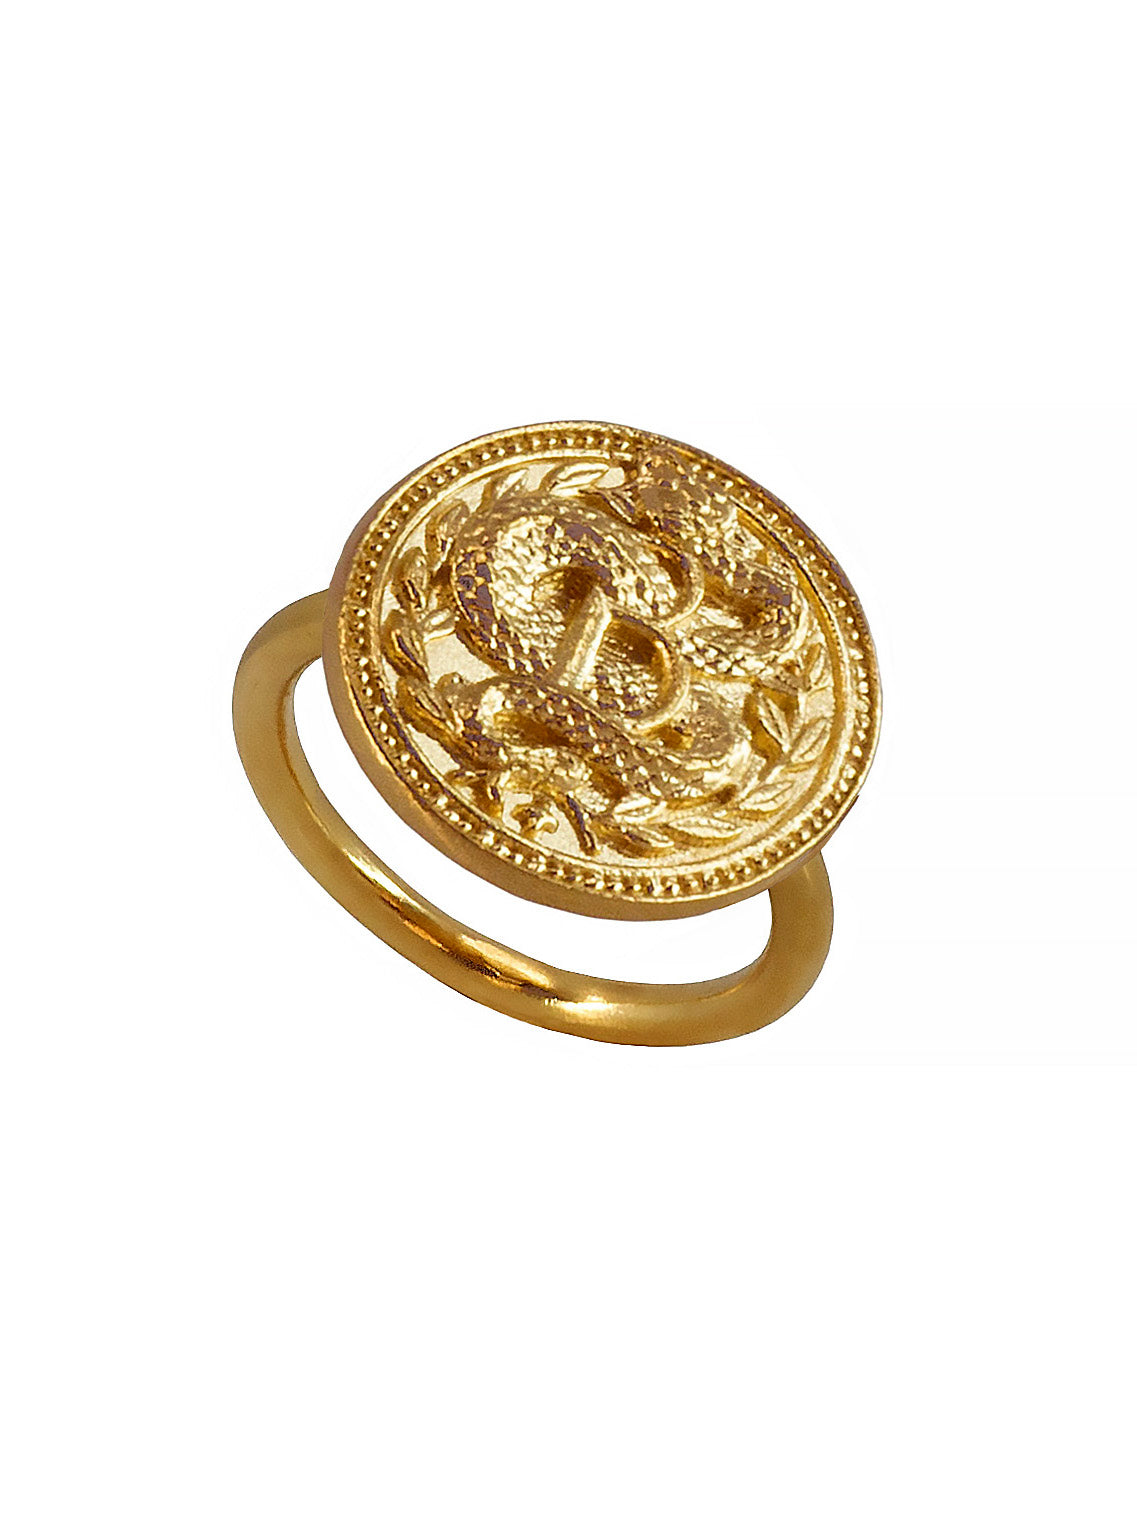 Blood type B Positive Ring. 23ct Gold plated Sterling Silver.Grupo sanguineo Anillo, Dorado